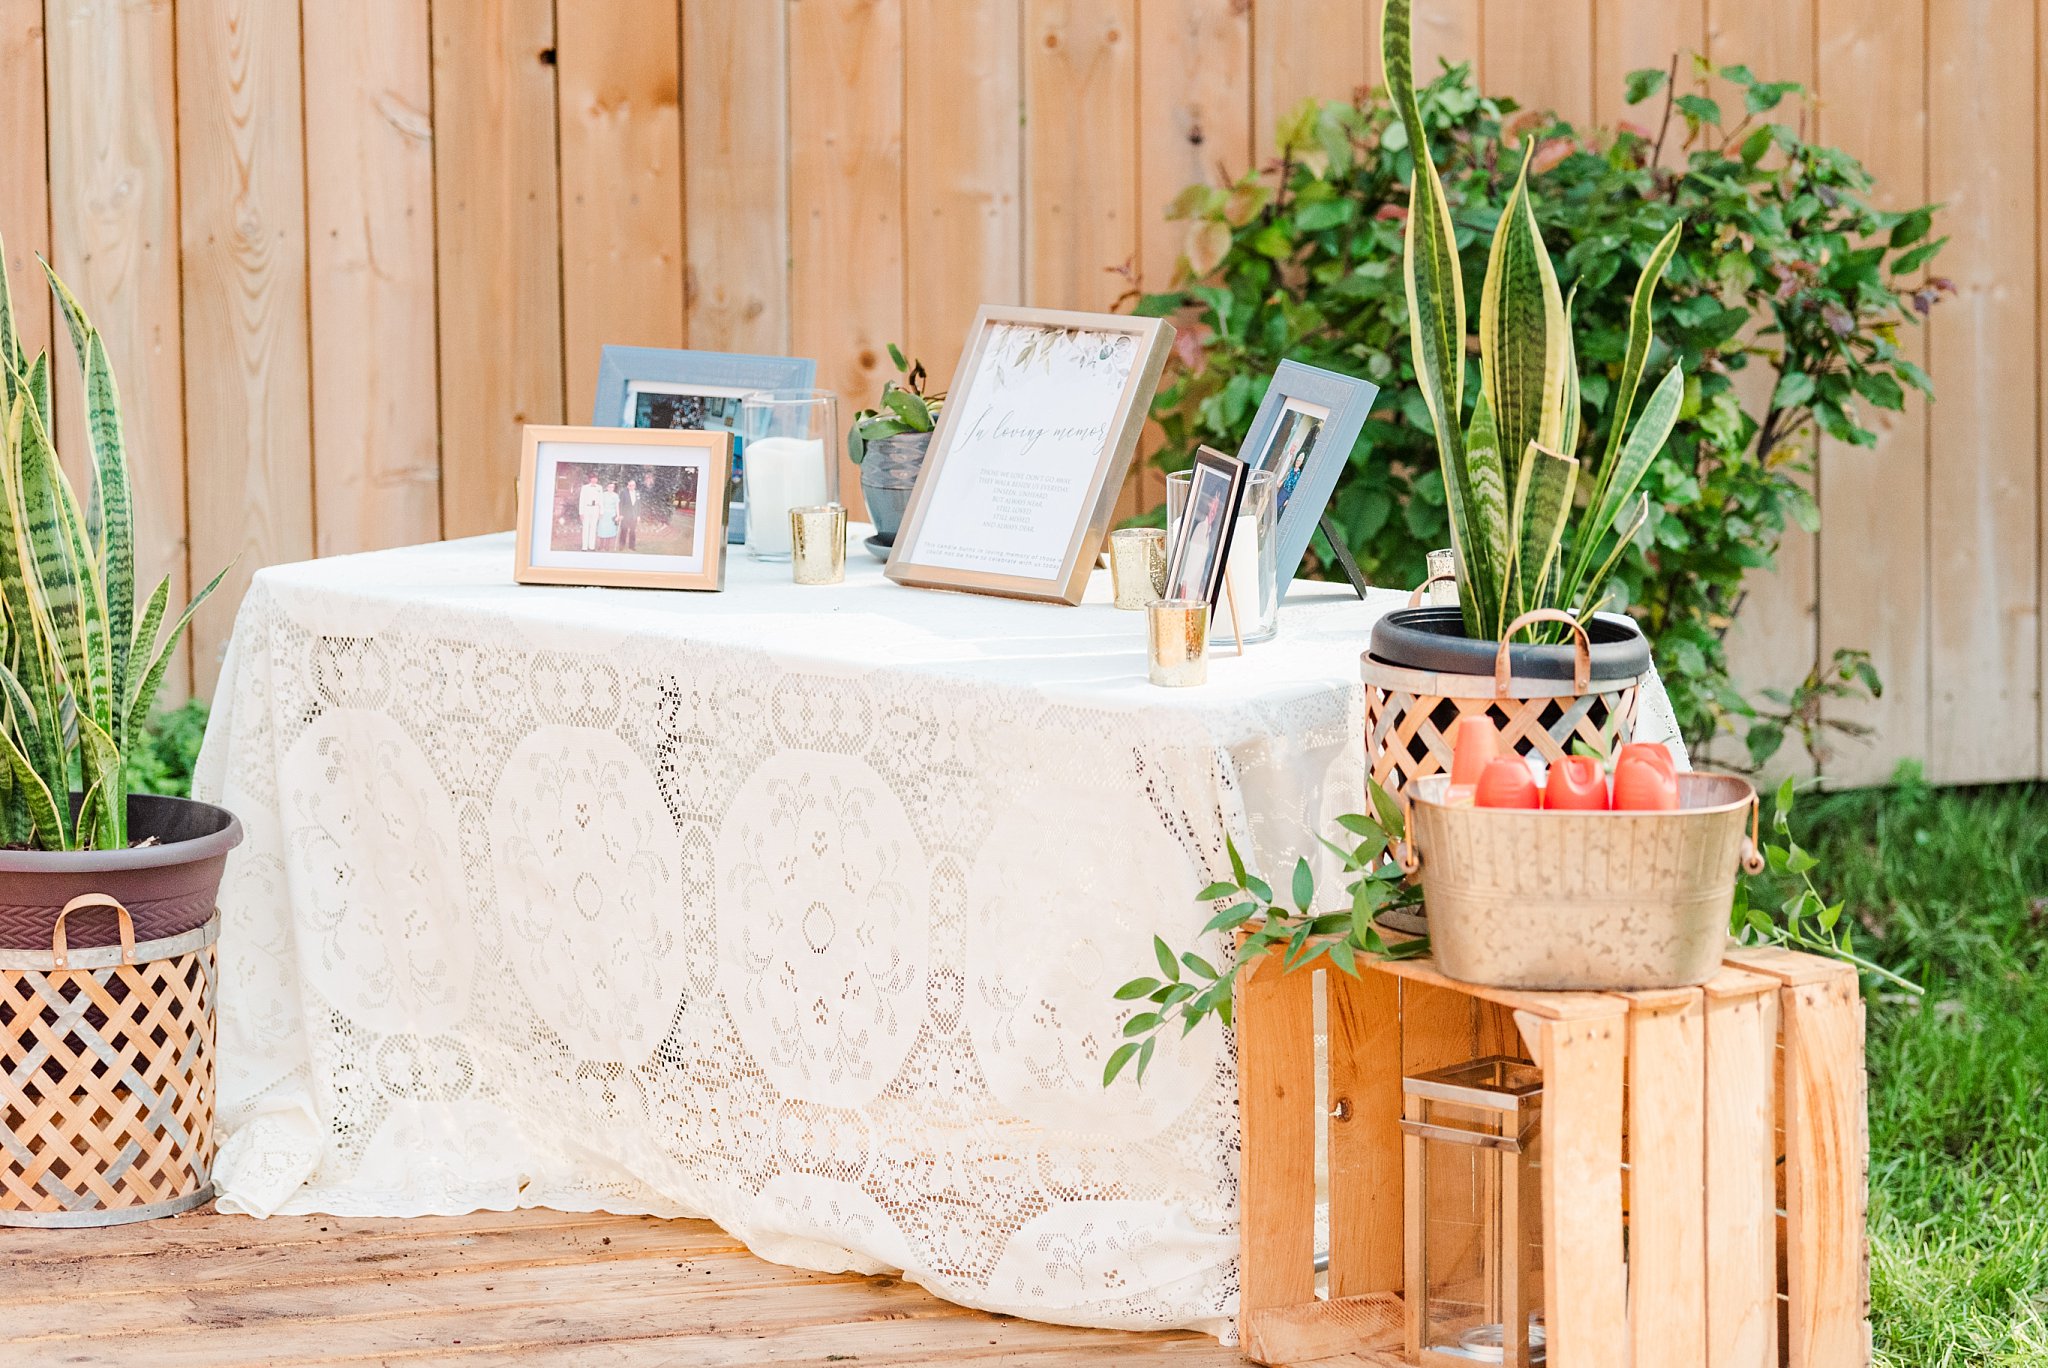 frames on a table draped in white lace